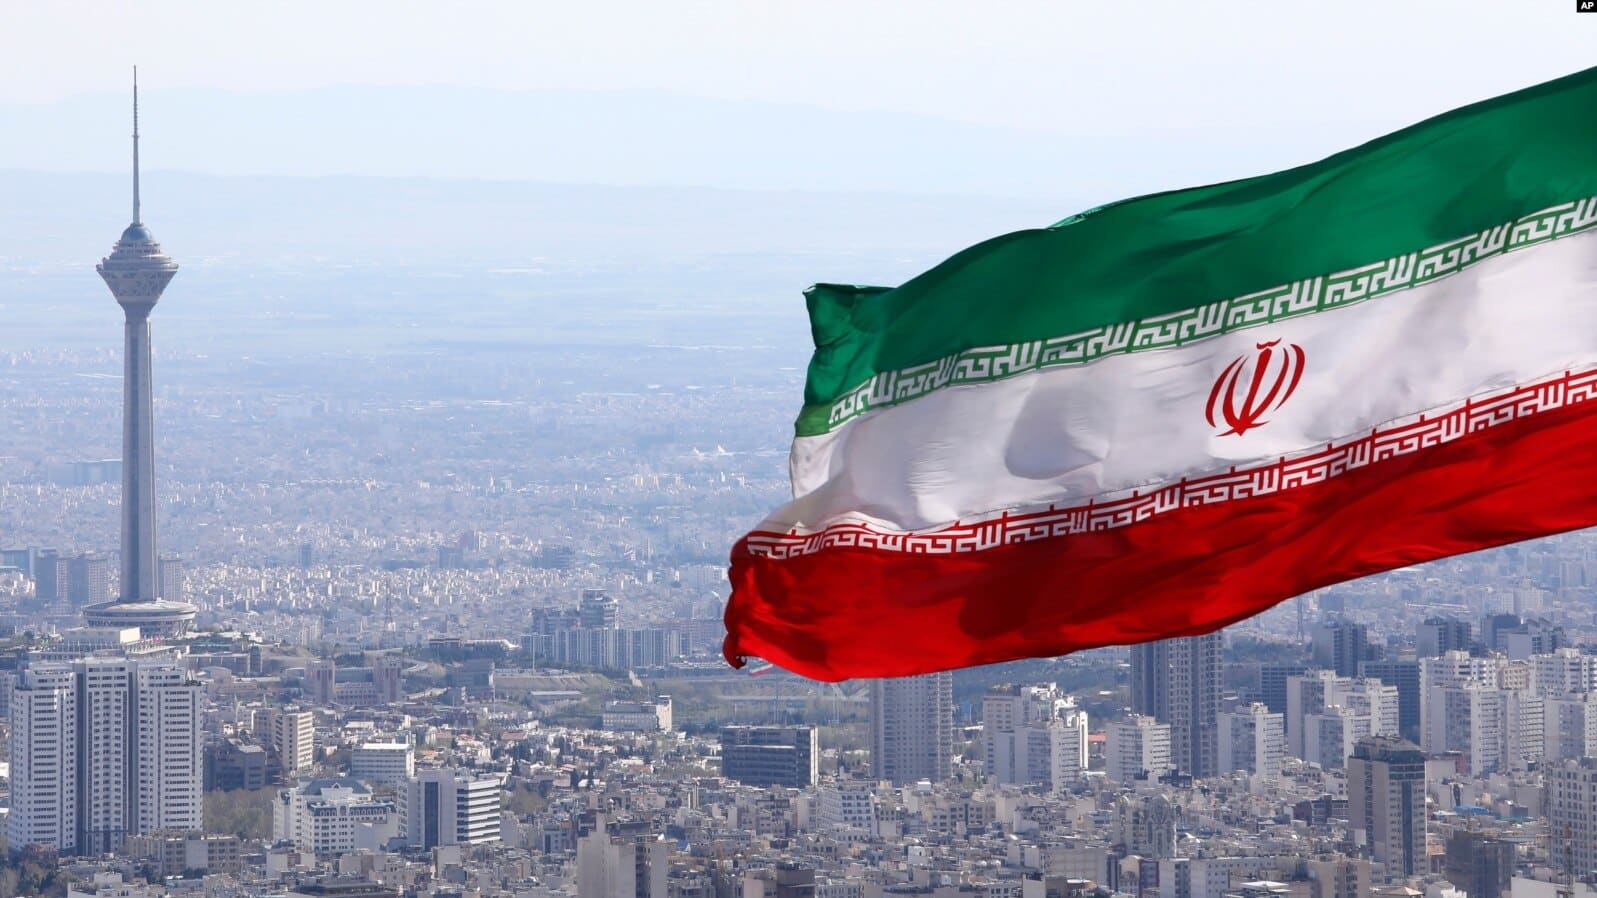 IAEA Again Condemns Iran Over ‘Lack of Cooperation’ on Particles